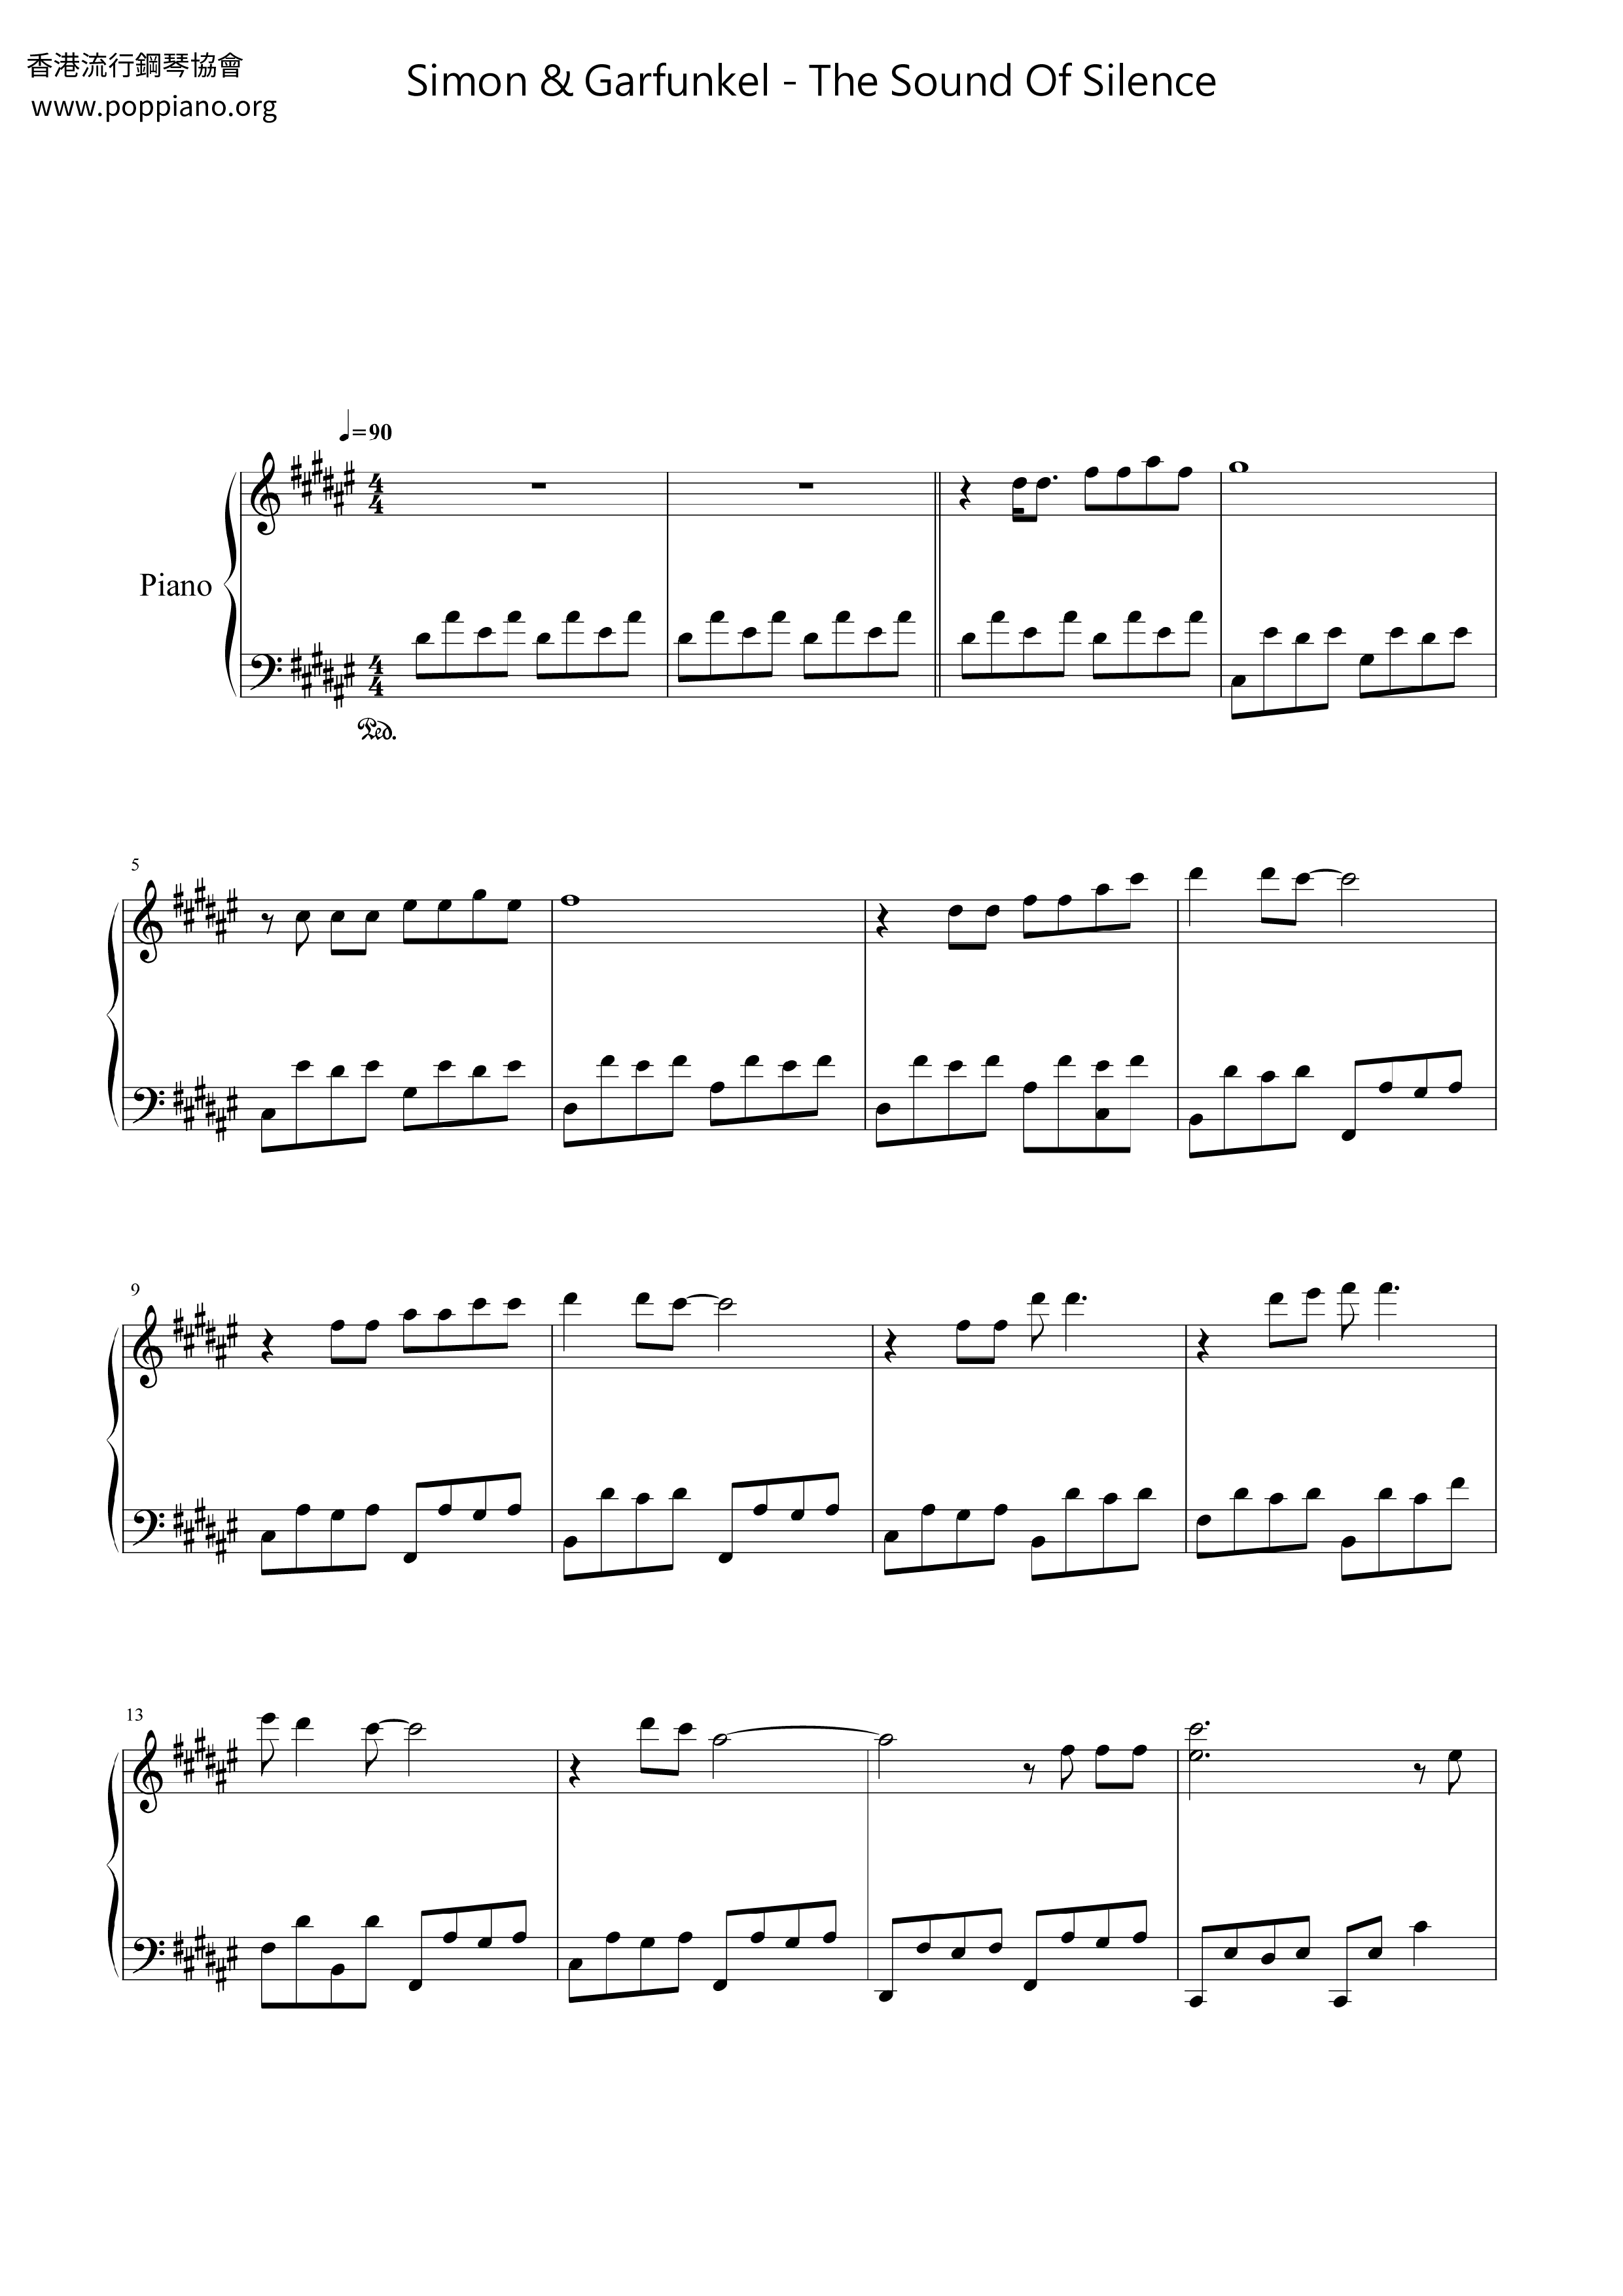 The Sound Of Silence Score